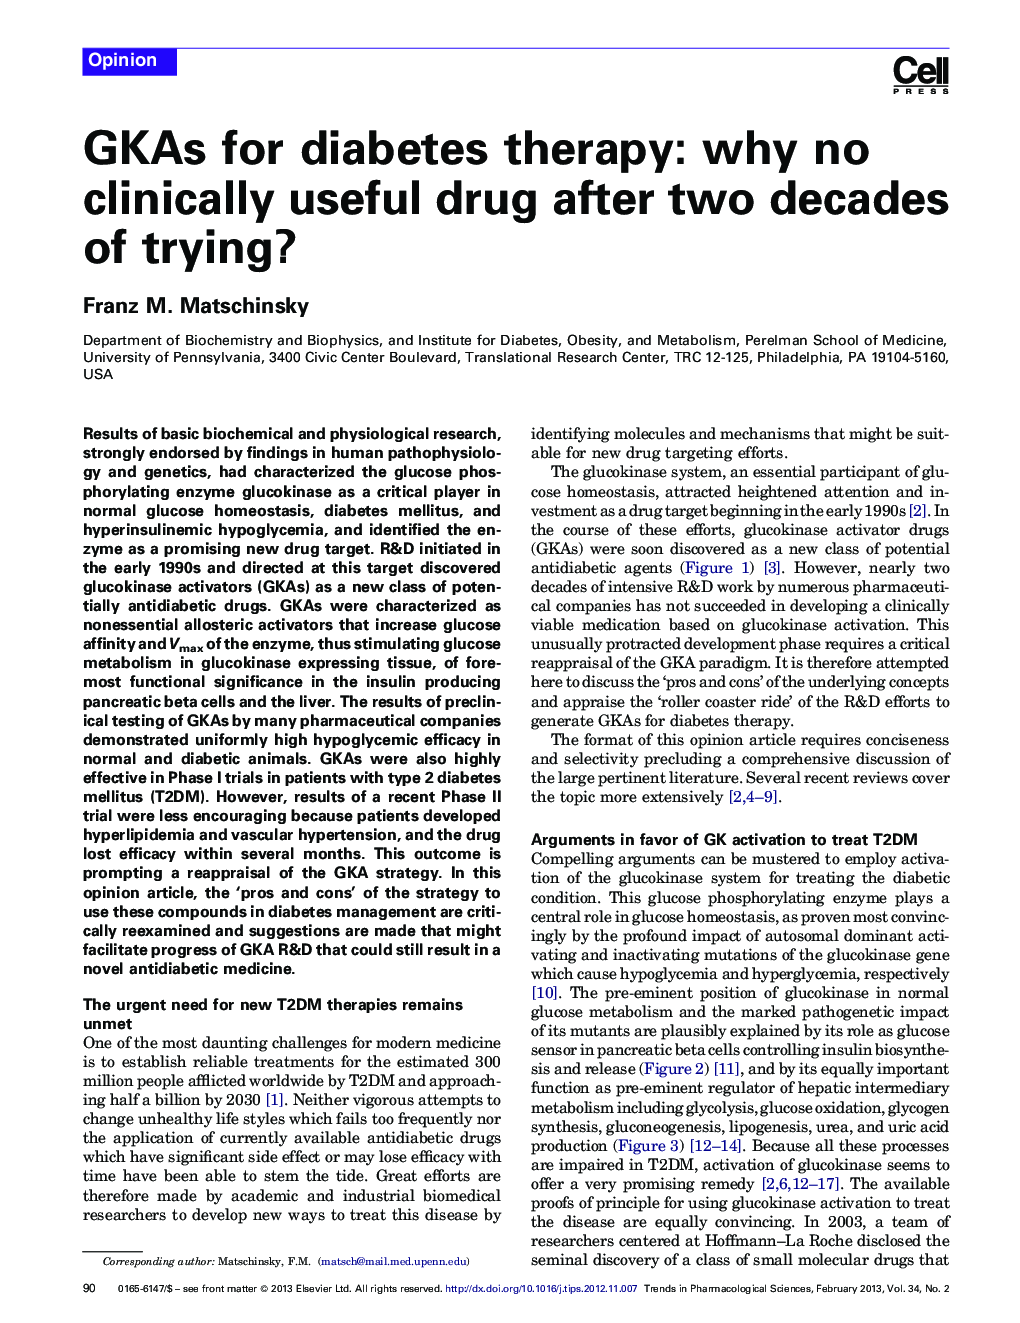 GKAs for diabetes therapy: why no clinically useful drug after two decades of trying?